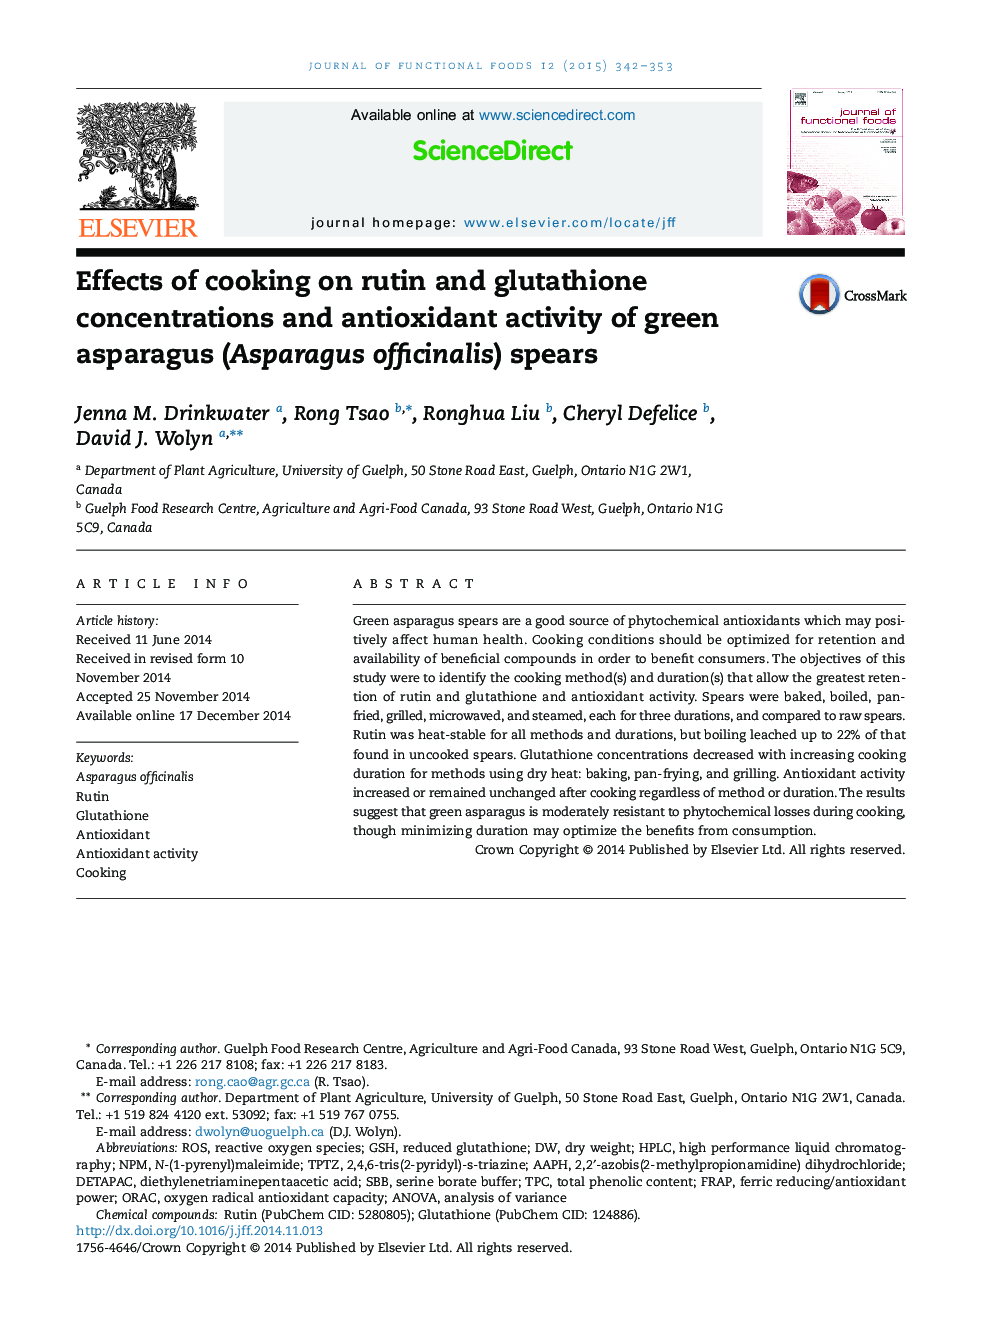 Effects of cooking on rutin and glutathione concentrations and antioxidant activity of green asparagus (Asparagus officinalis) spears